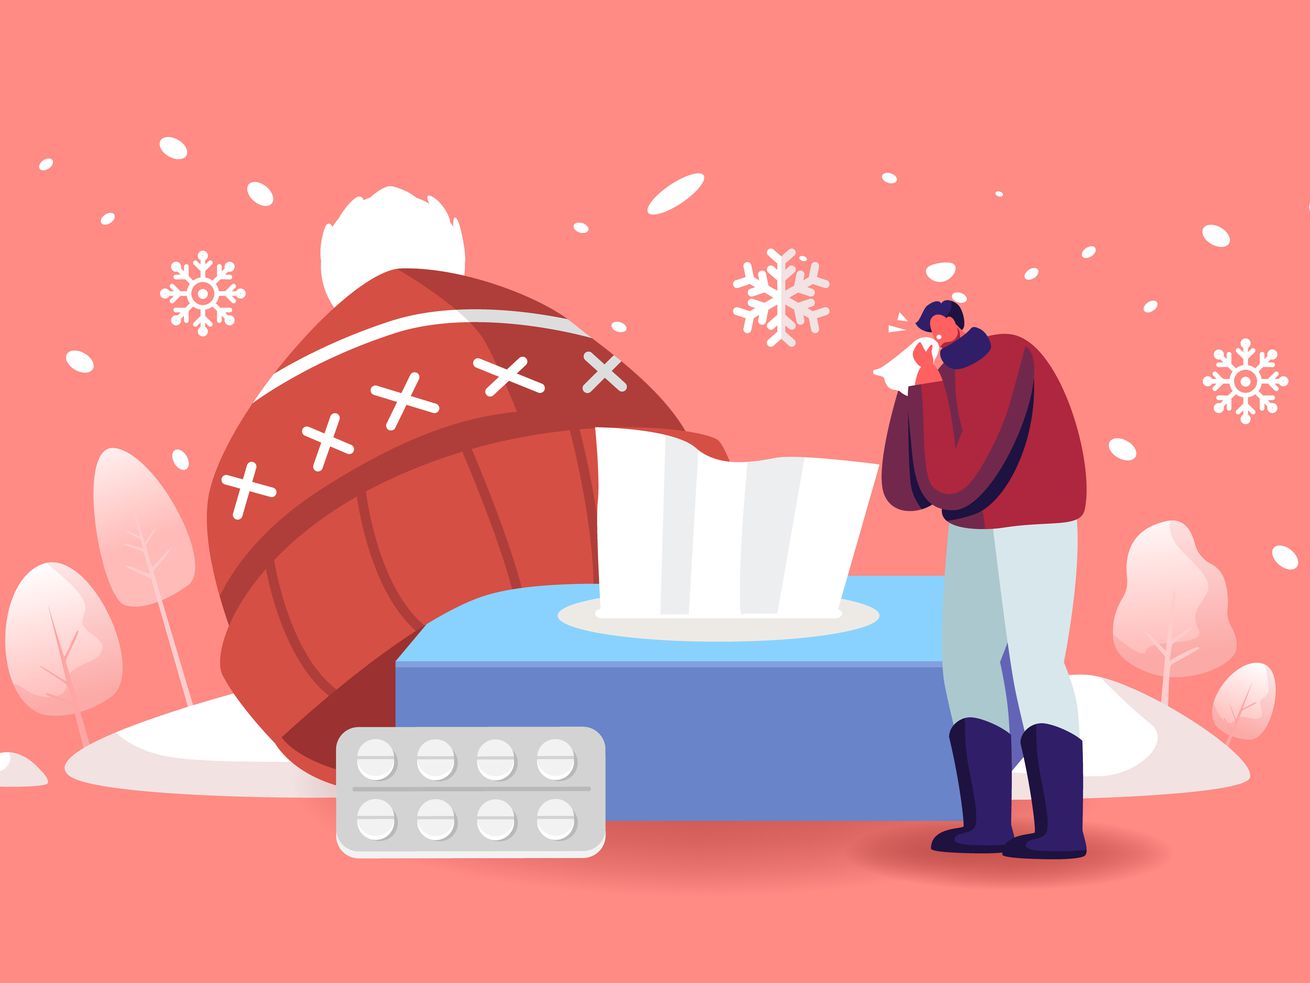 Illustration of a snowy scene containing a huge box of tissues, a blister pack of pills, a large warm hat, and a small person blowing their nose.